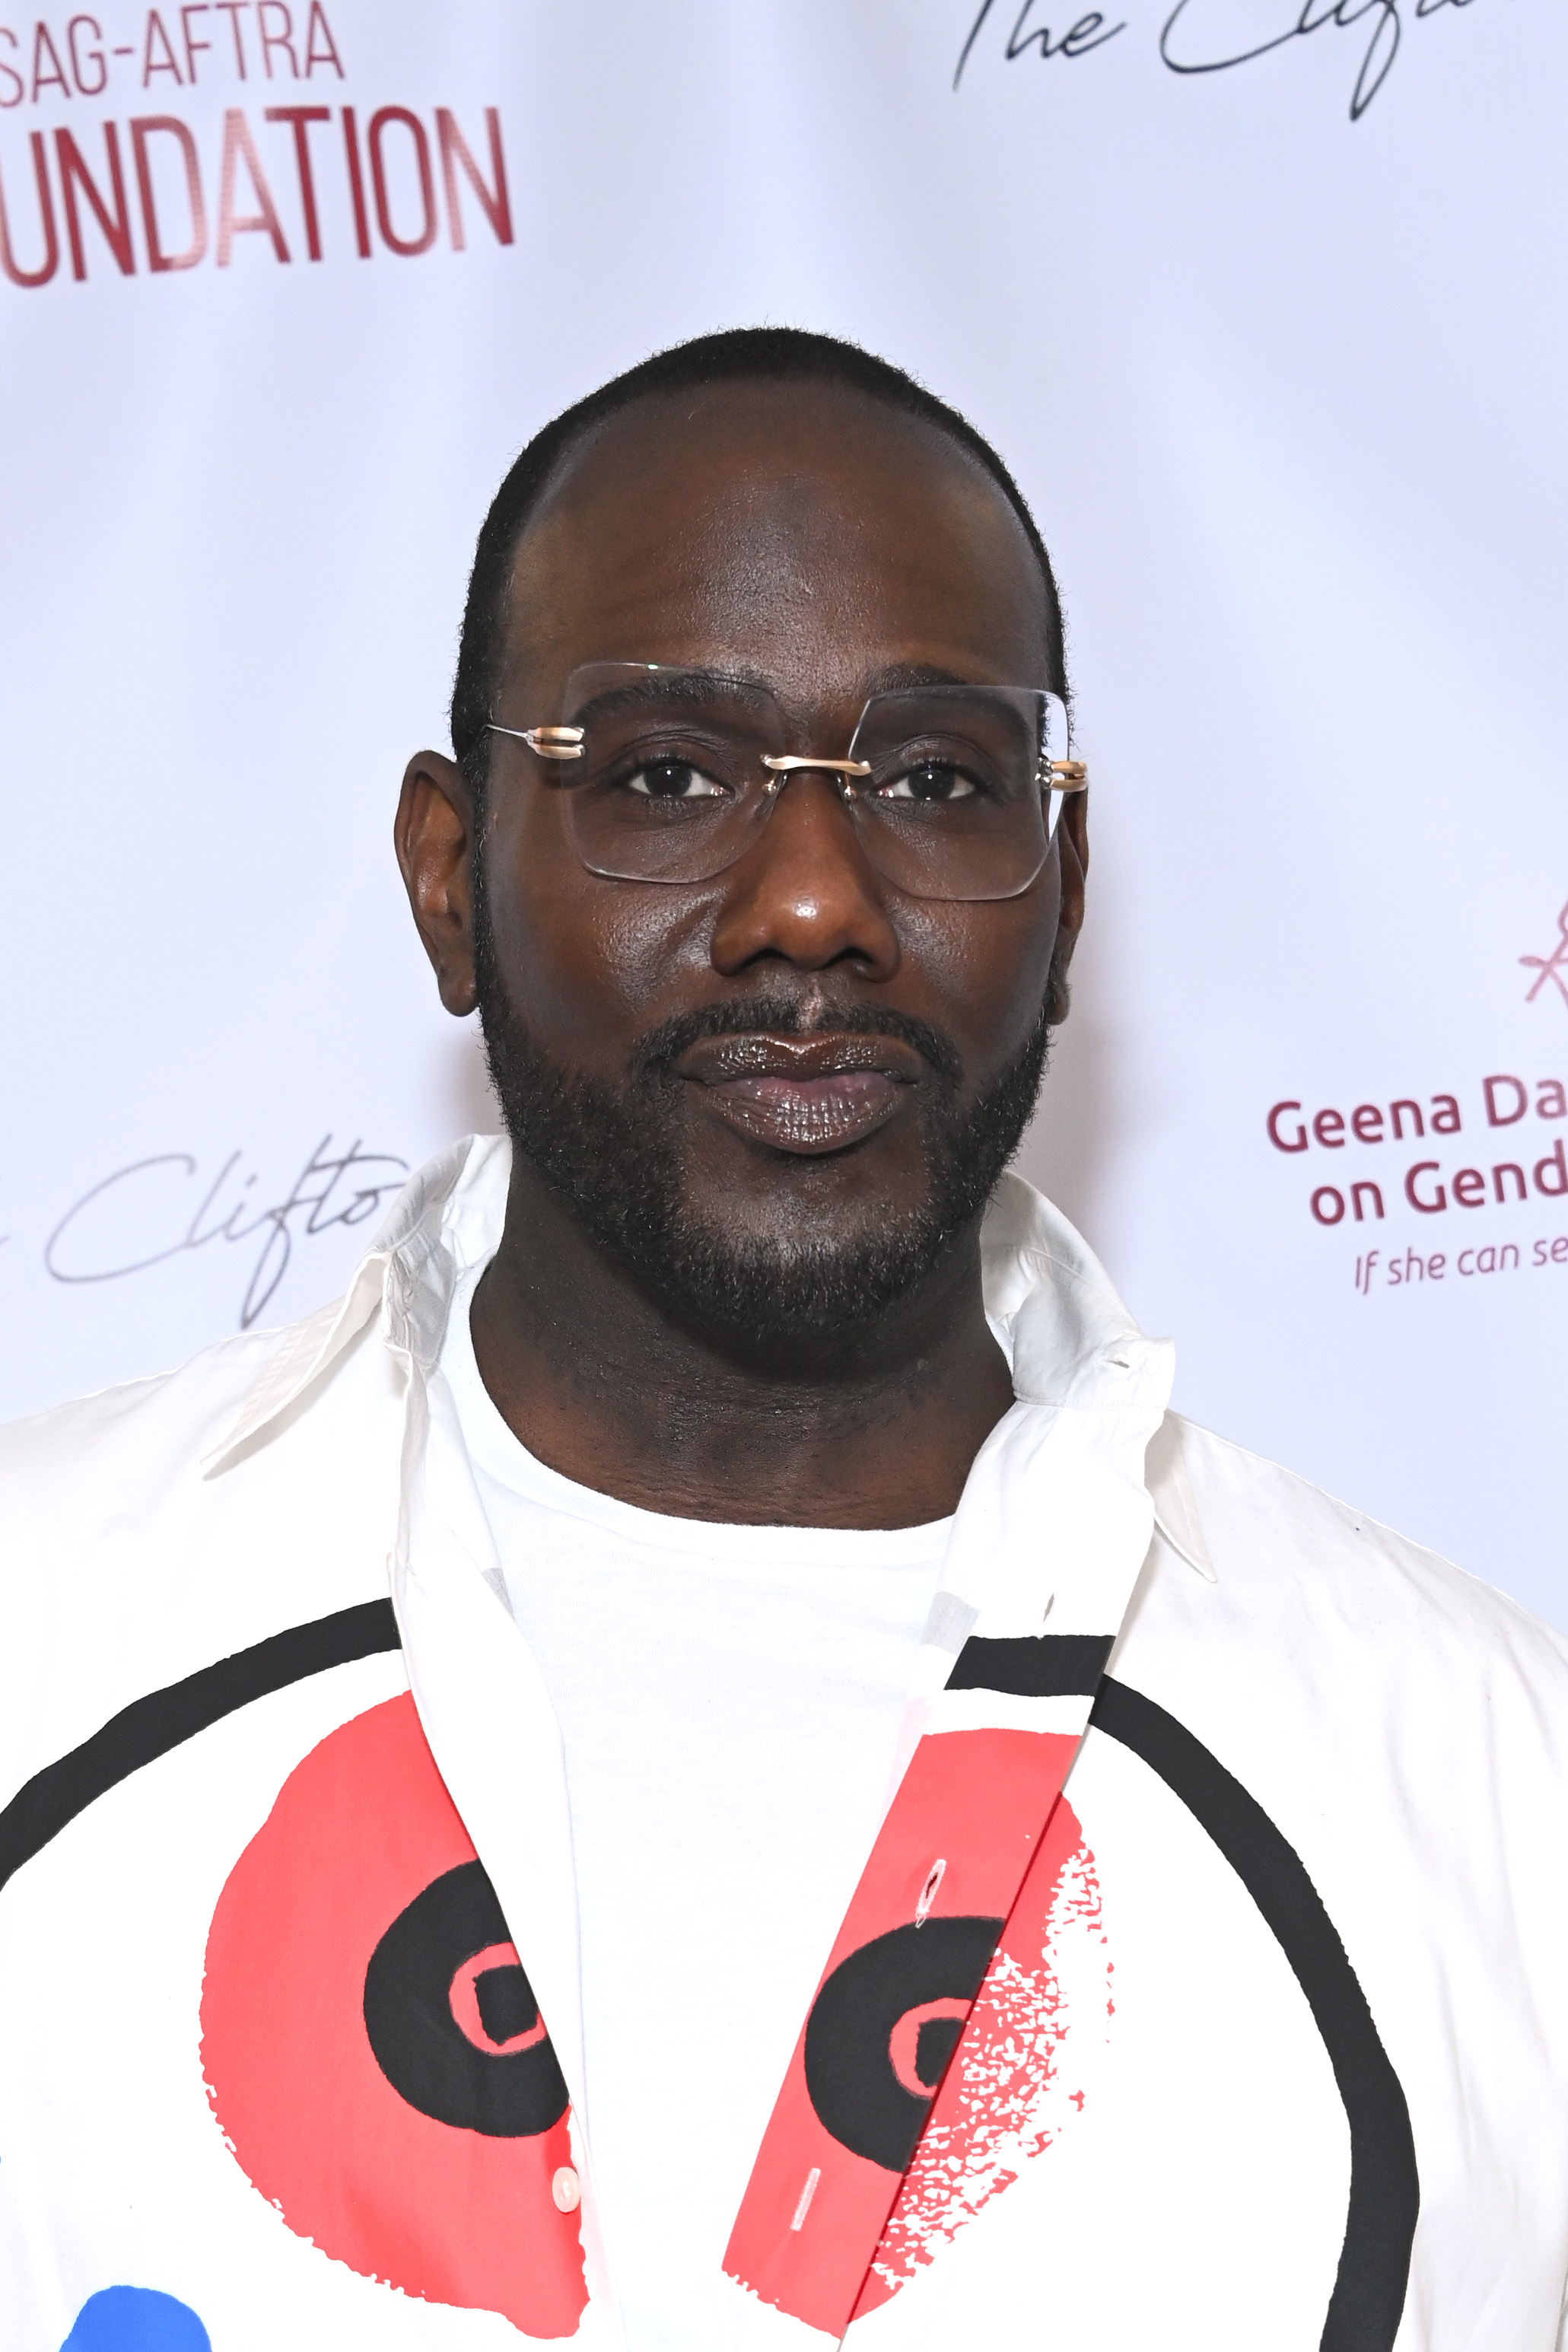 Man in unique glasses and white shirt with graphic design, standing before a promotional backdrop